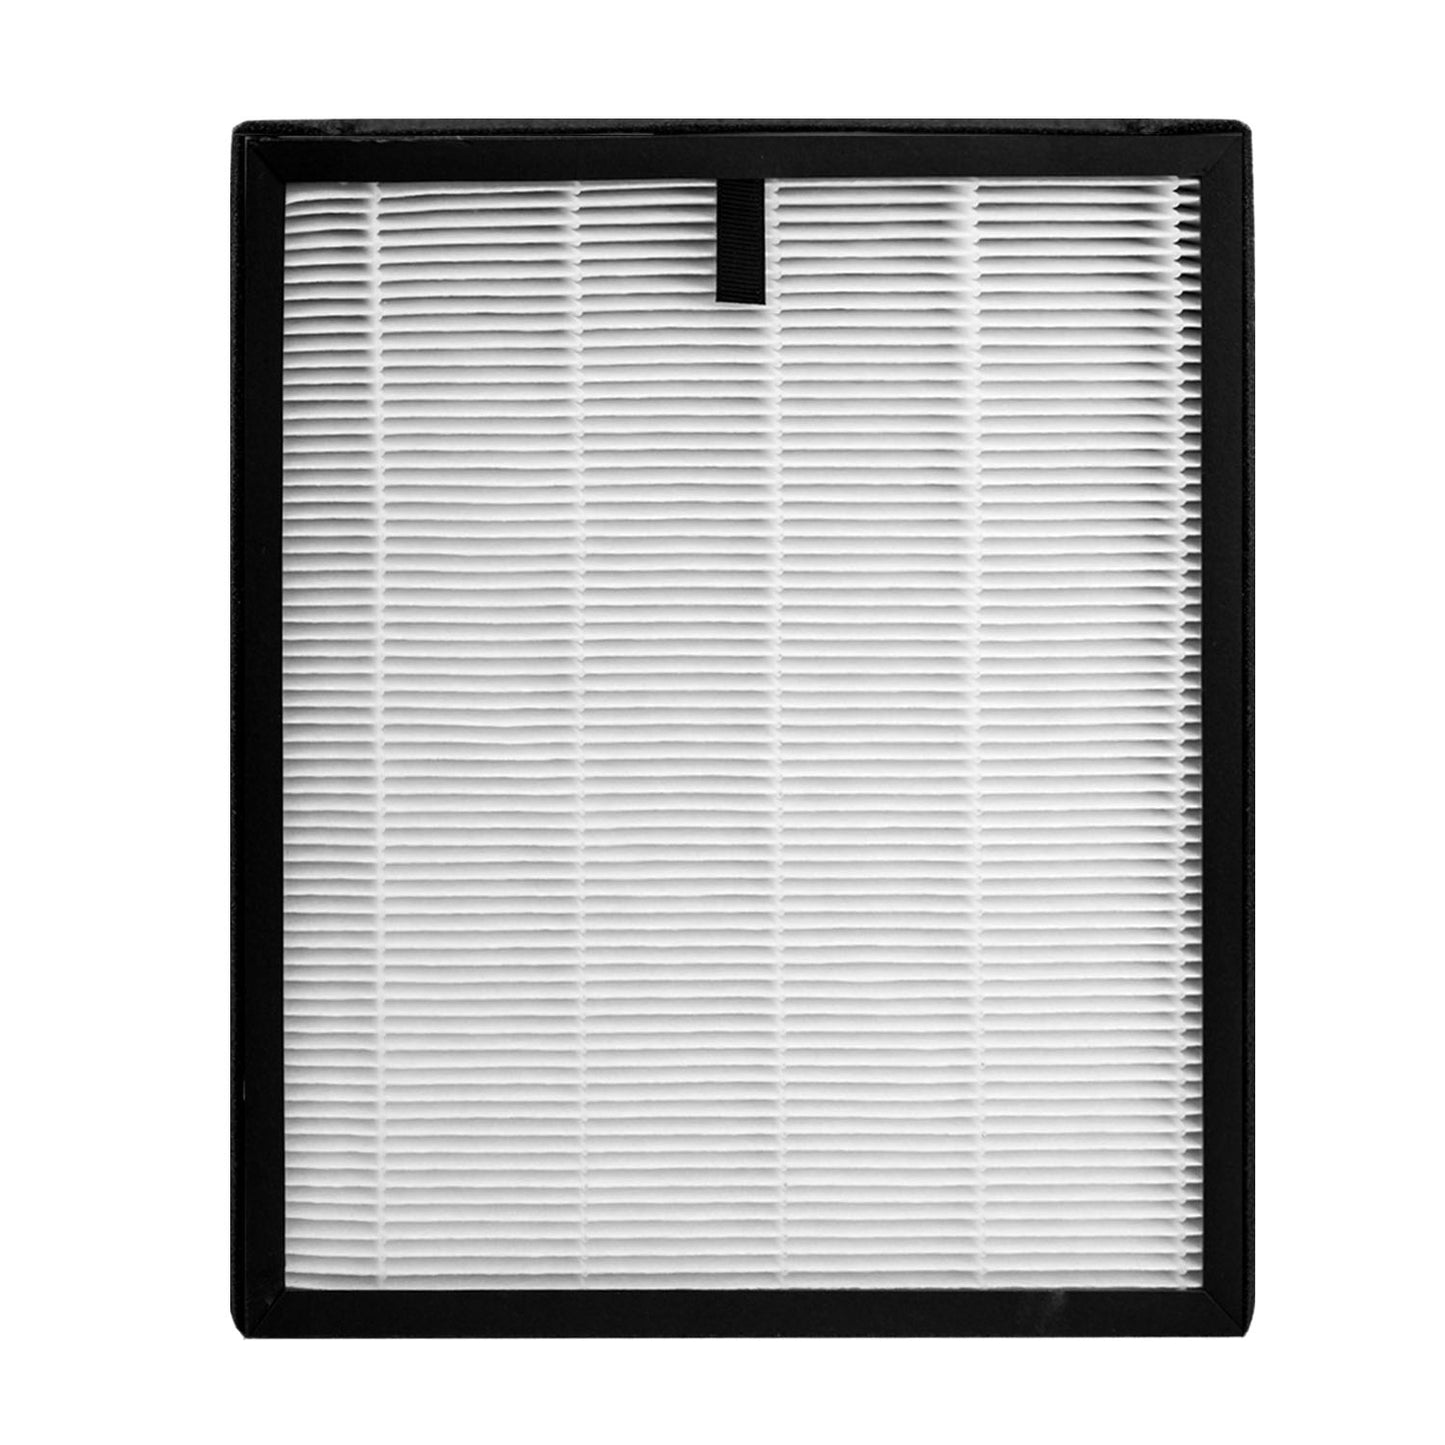 HY4866 Replacement Filter Compatible with HY4866 and M1 Air Purifier, 3-IN-1 True HEPA and High-Efficiency Activated Carbon Filter, 2 Pack